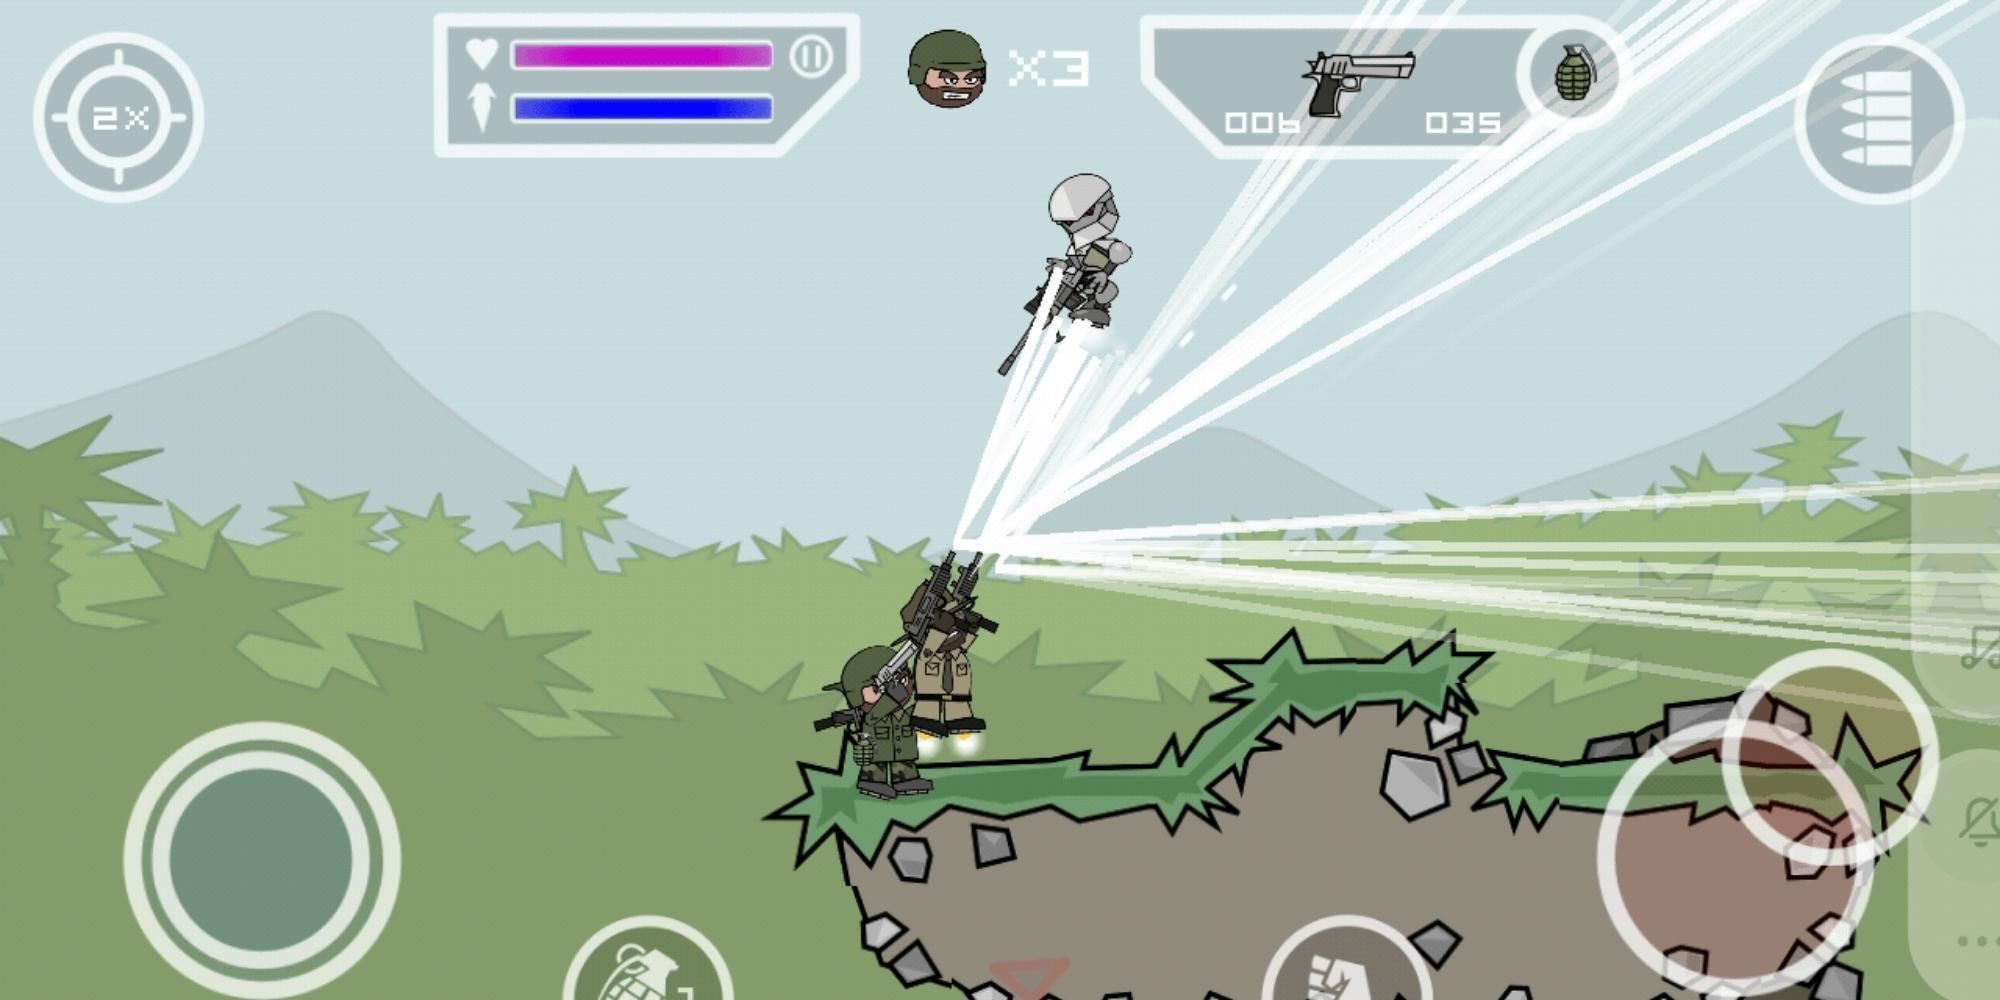 armies fighting in Doodle Army 2